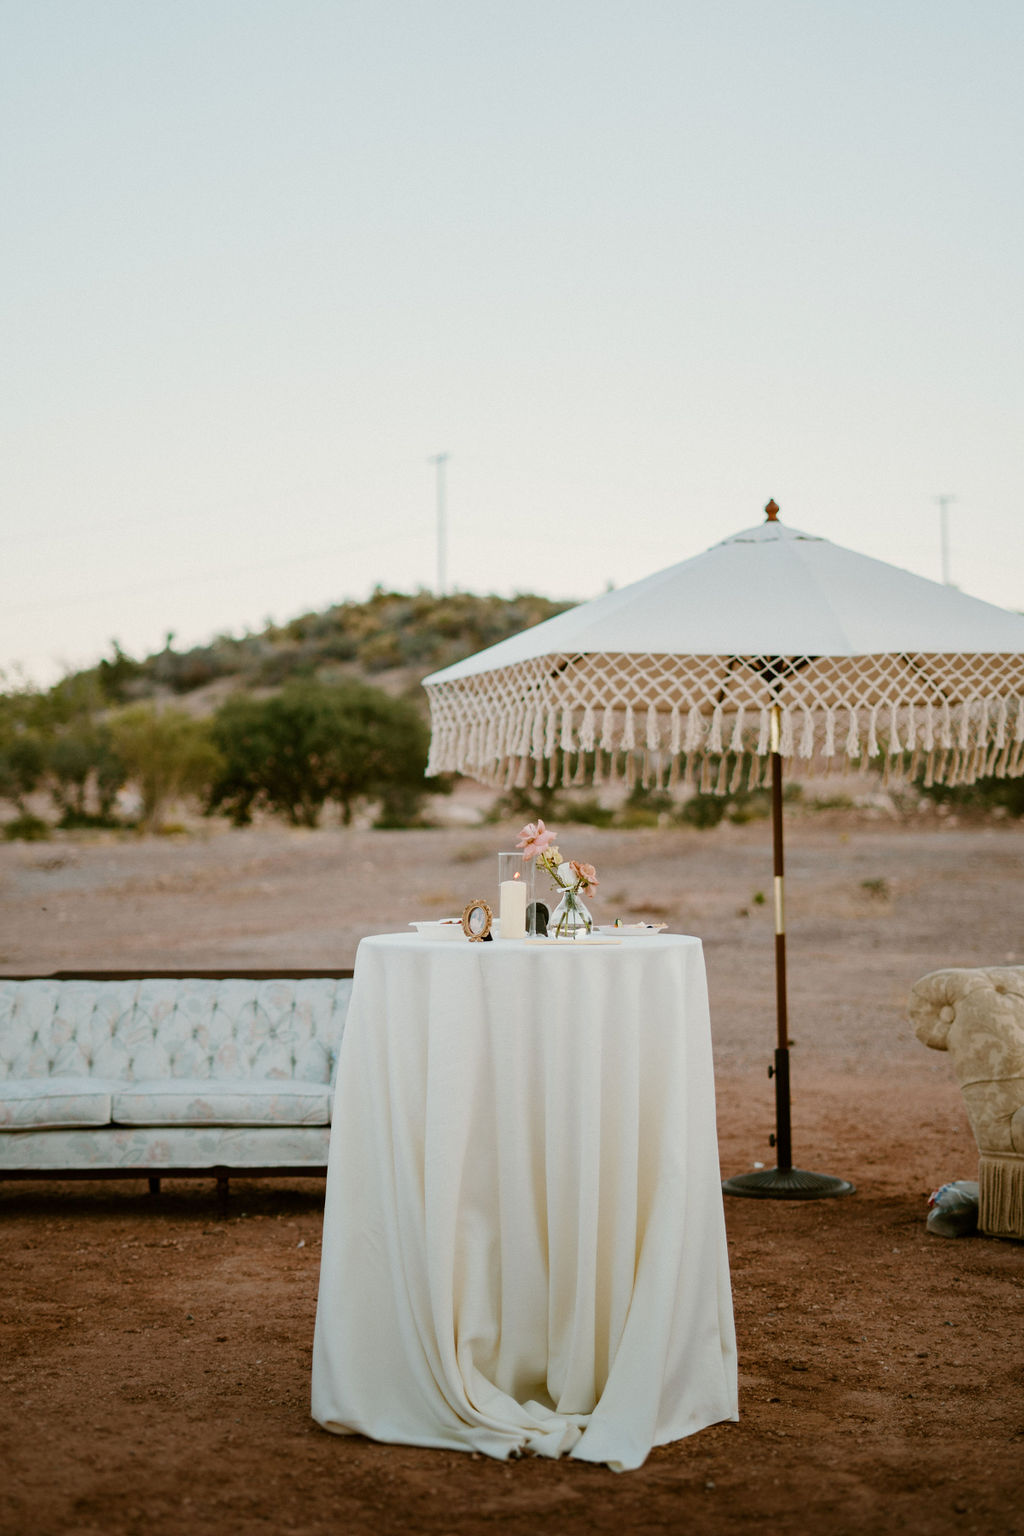 An outdoor event setup featuring a small round table with a white cloth, decorative items on top, and a large umbrella, surrounded by a natural landscape and a vintage sofa.